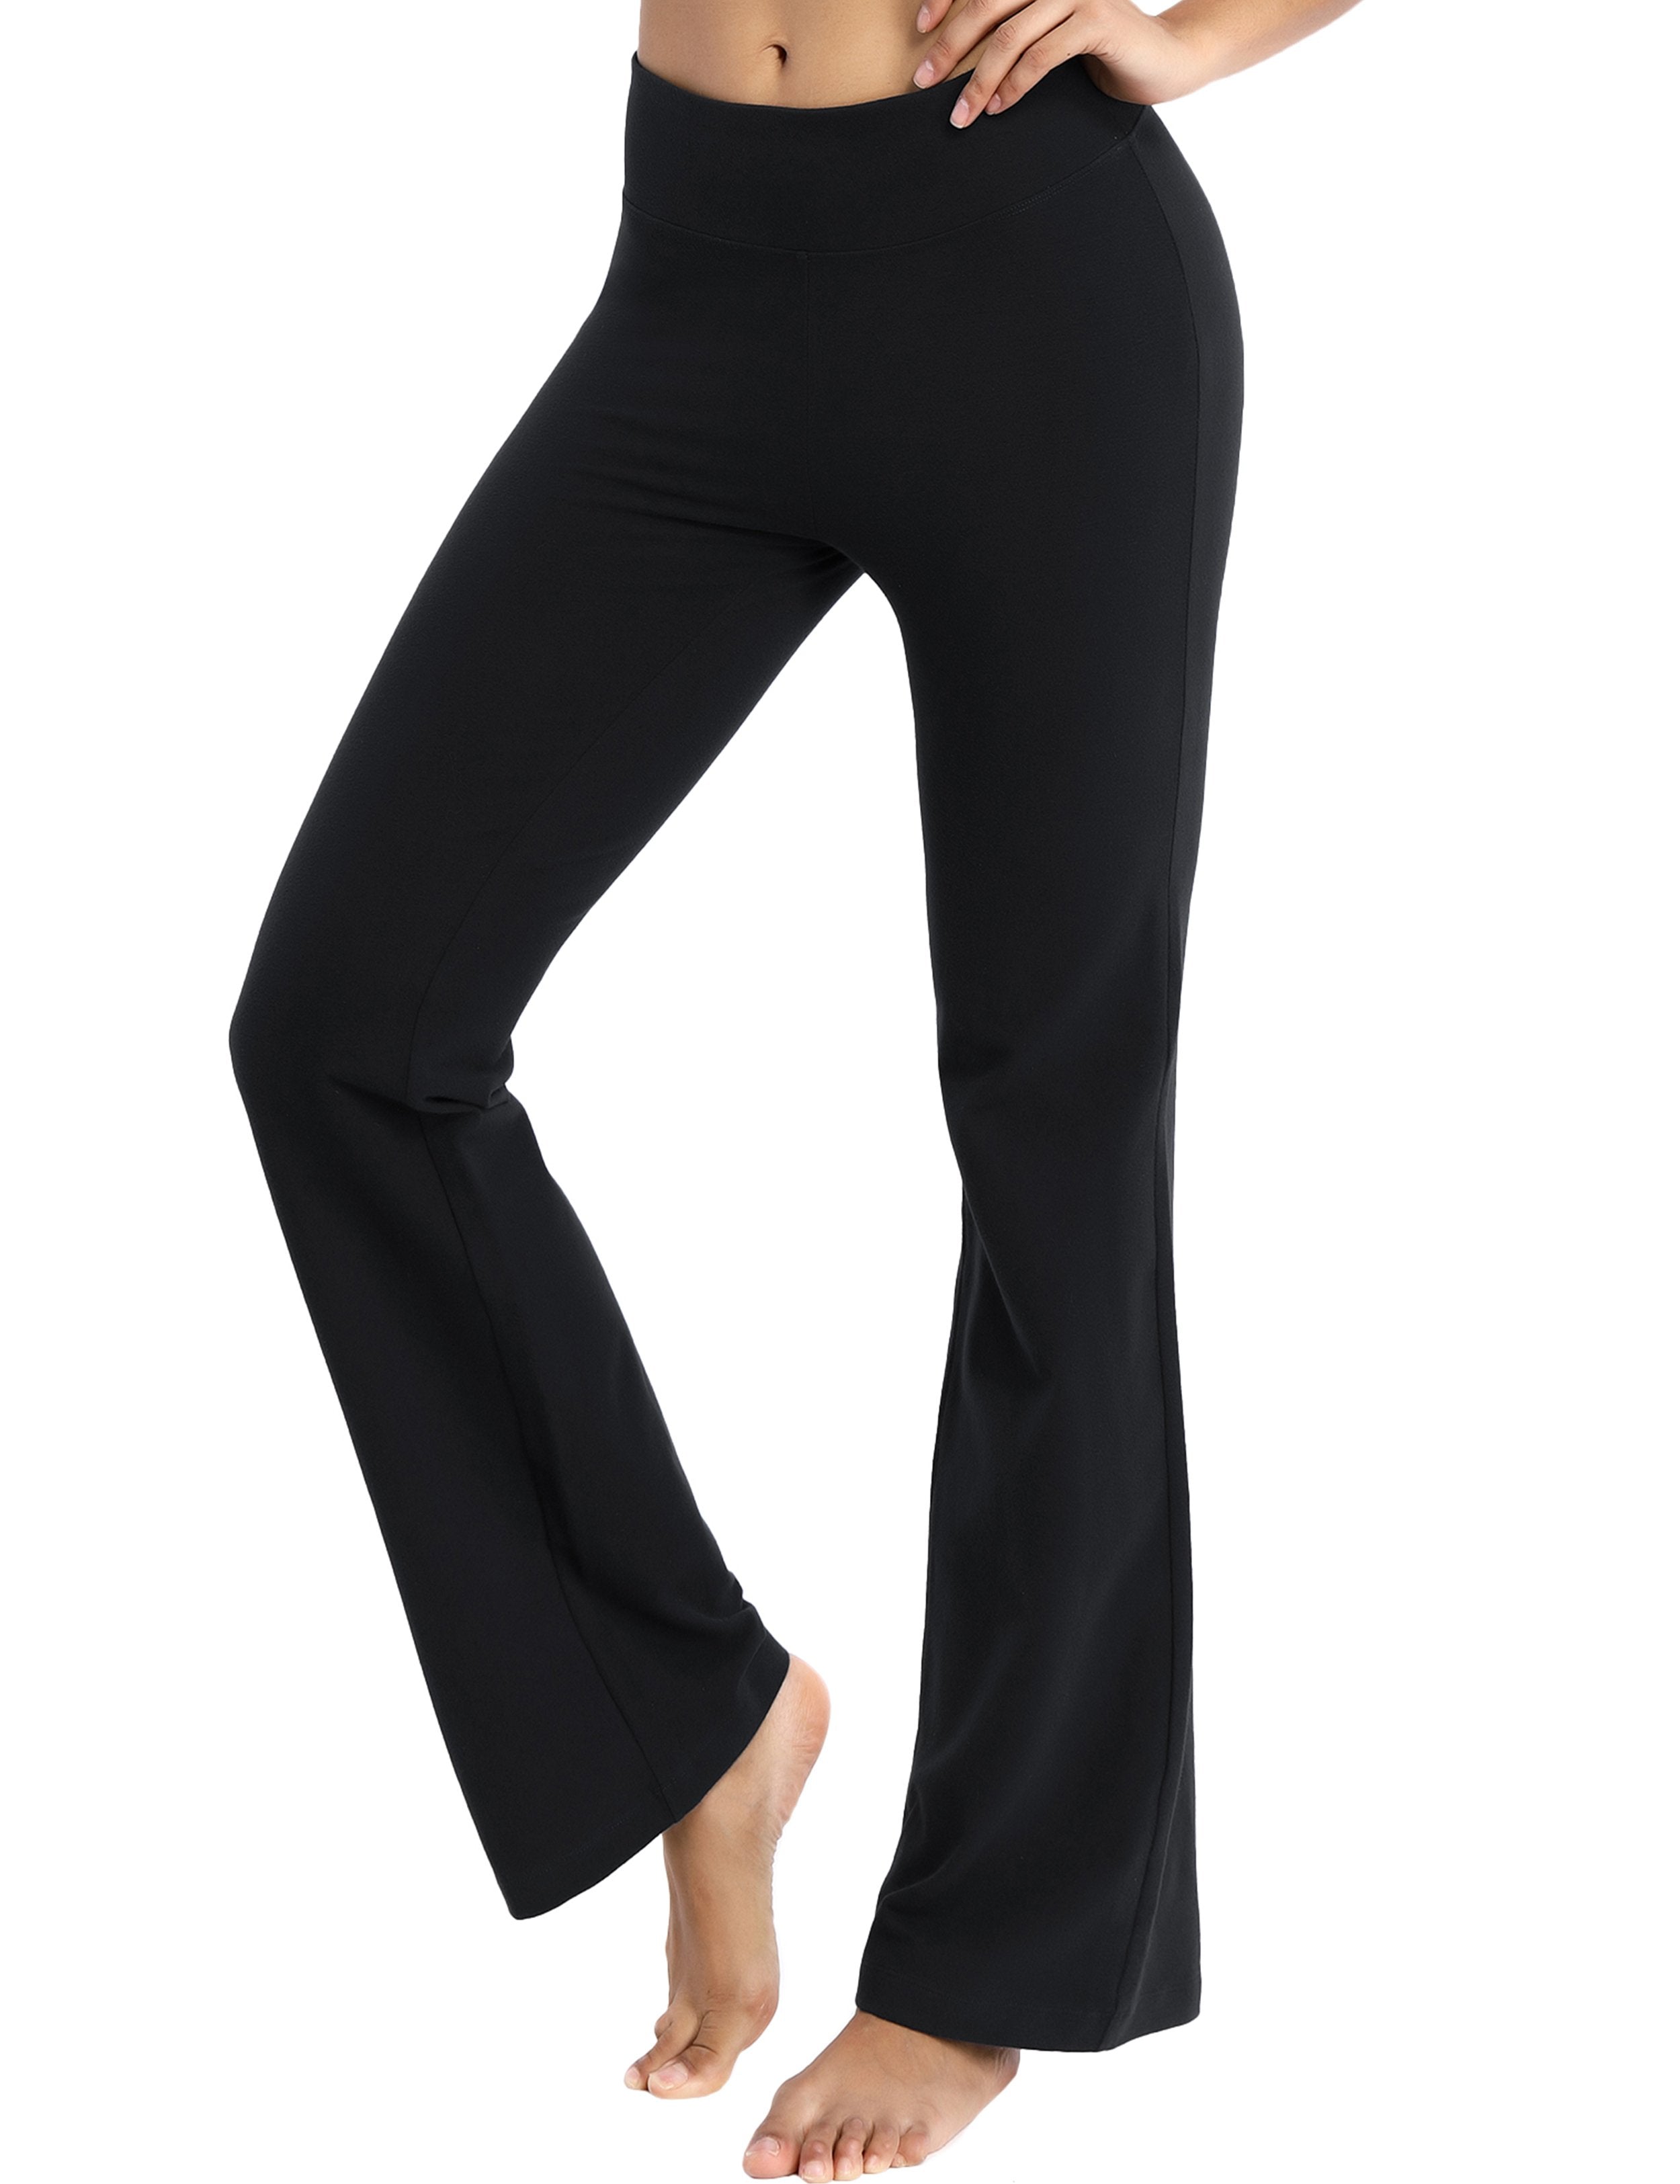 Cotton Bootcut Leggings black 90%Cotton/10%Spandex (soft and cotton feel) Fabric doesn't attract lint easily 4-way stretch No see-through Moisture-wicking Inner pocket Four lengths